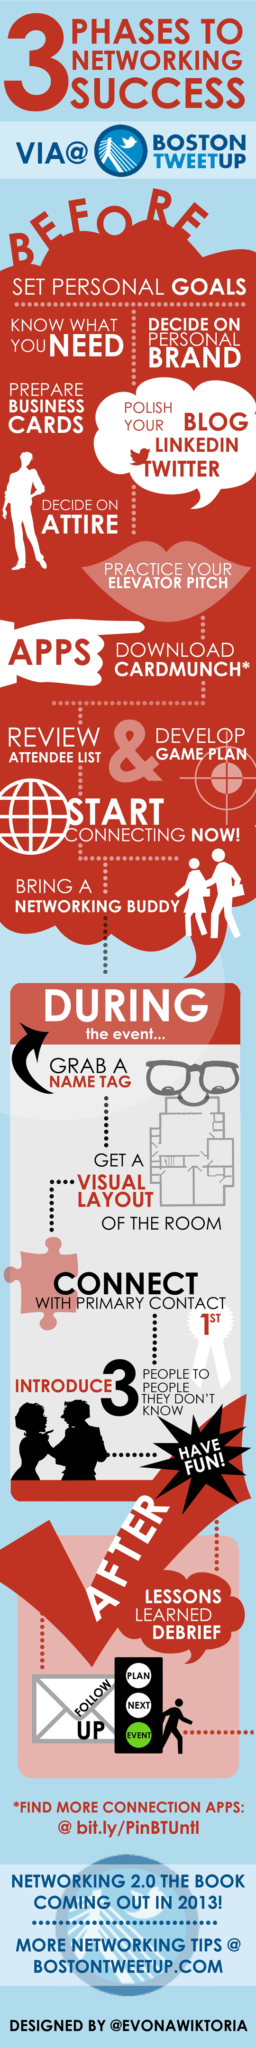 3 Phases to Networking Success